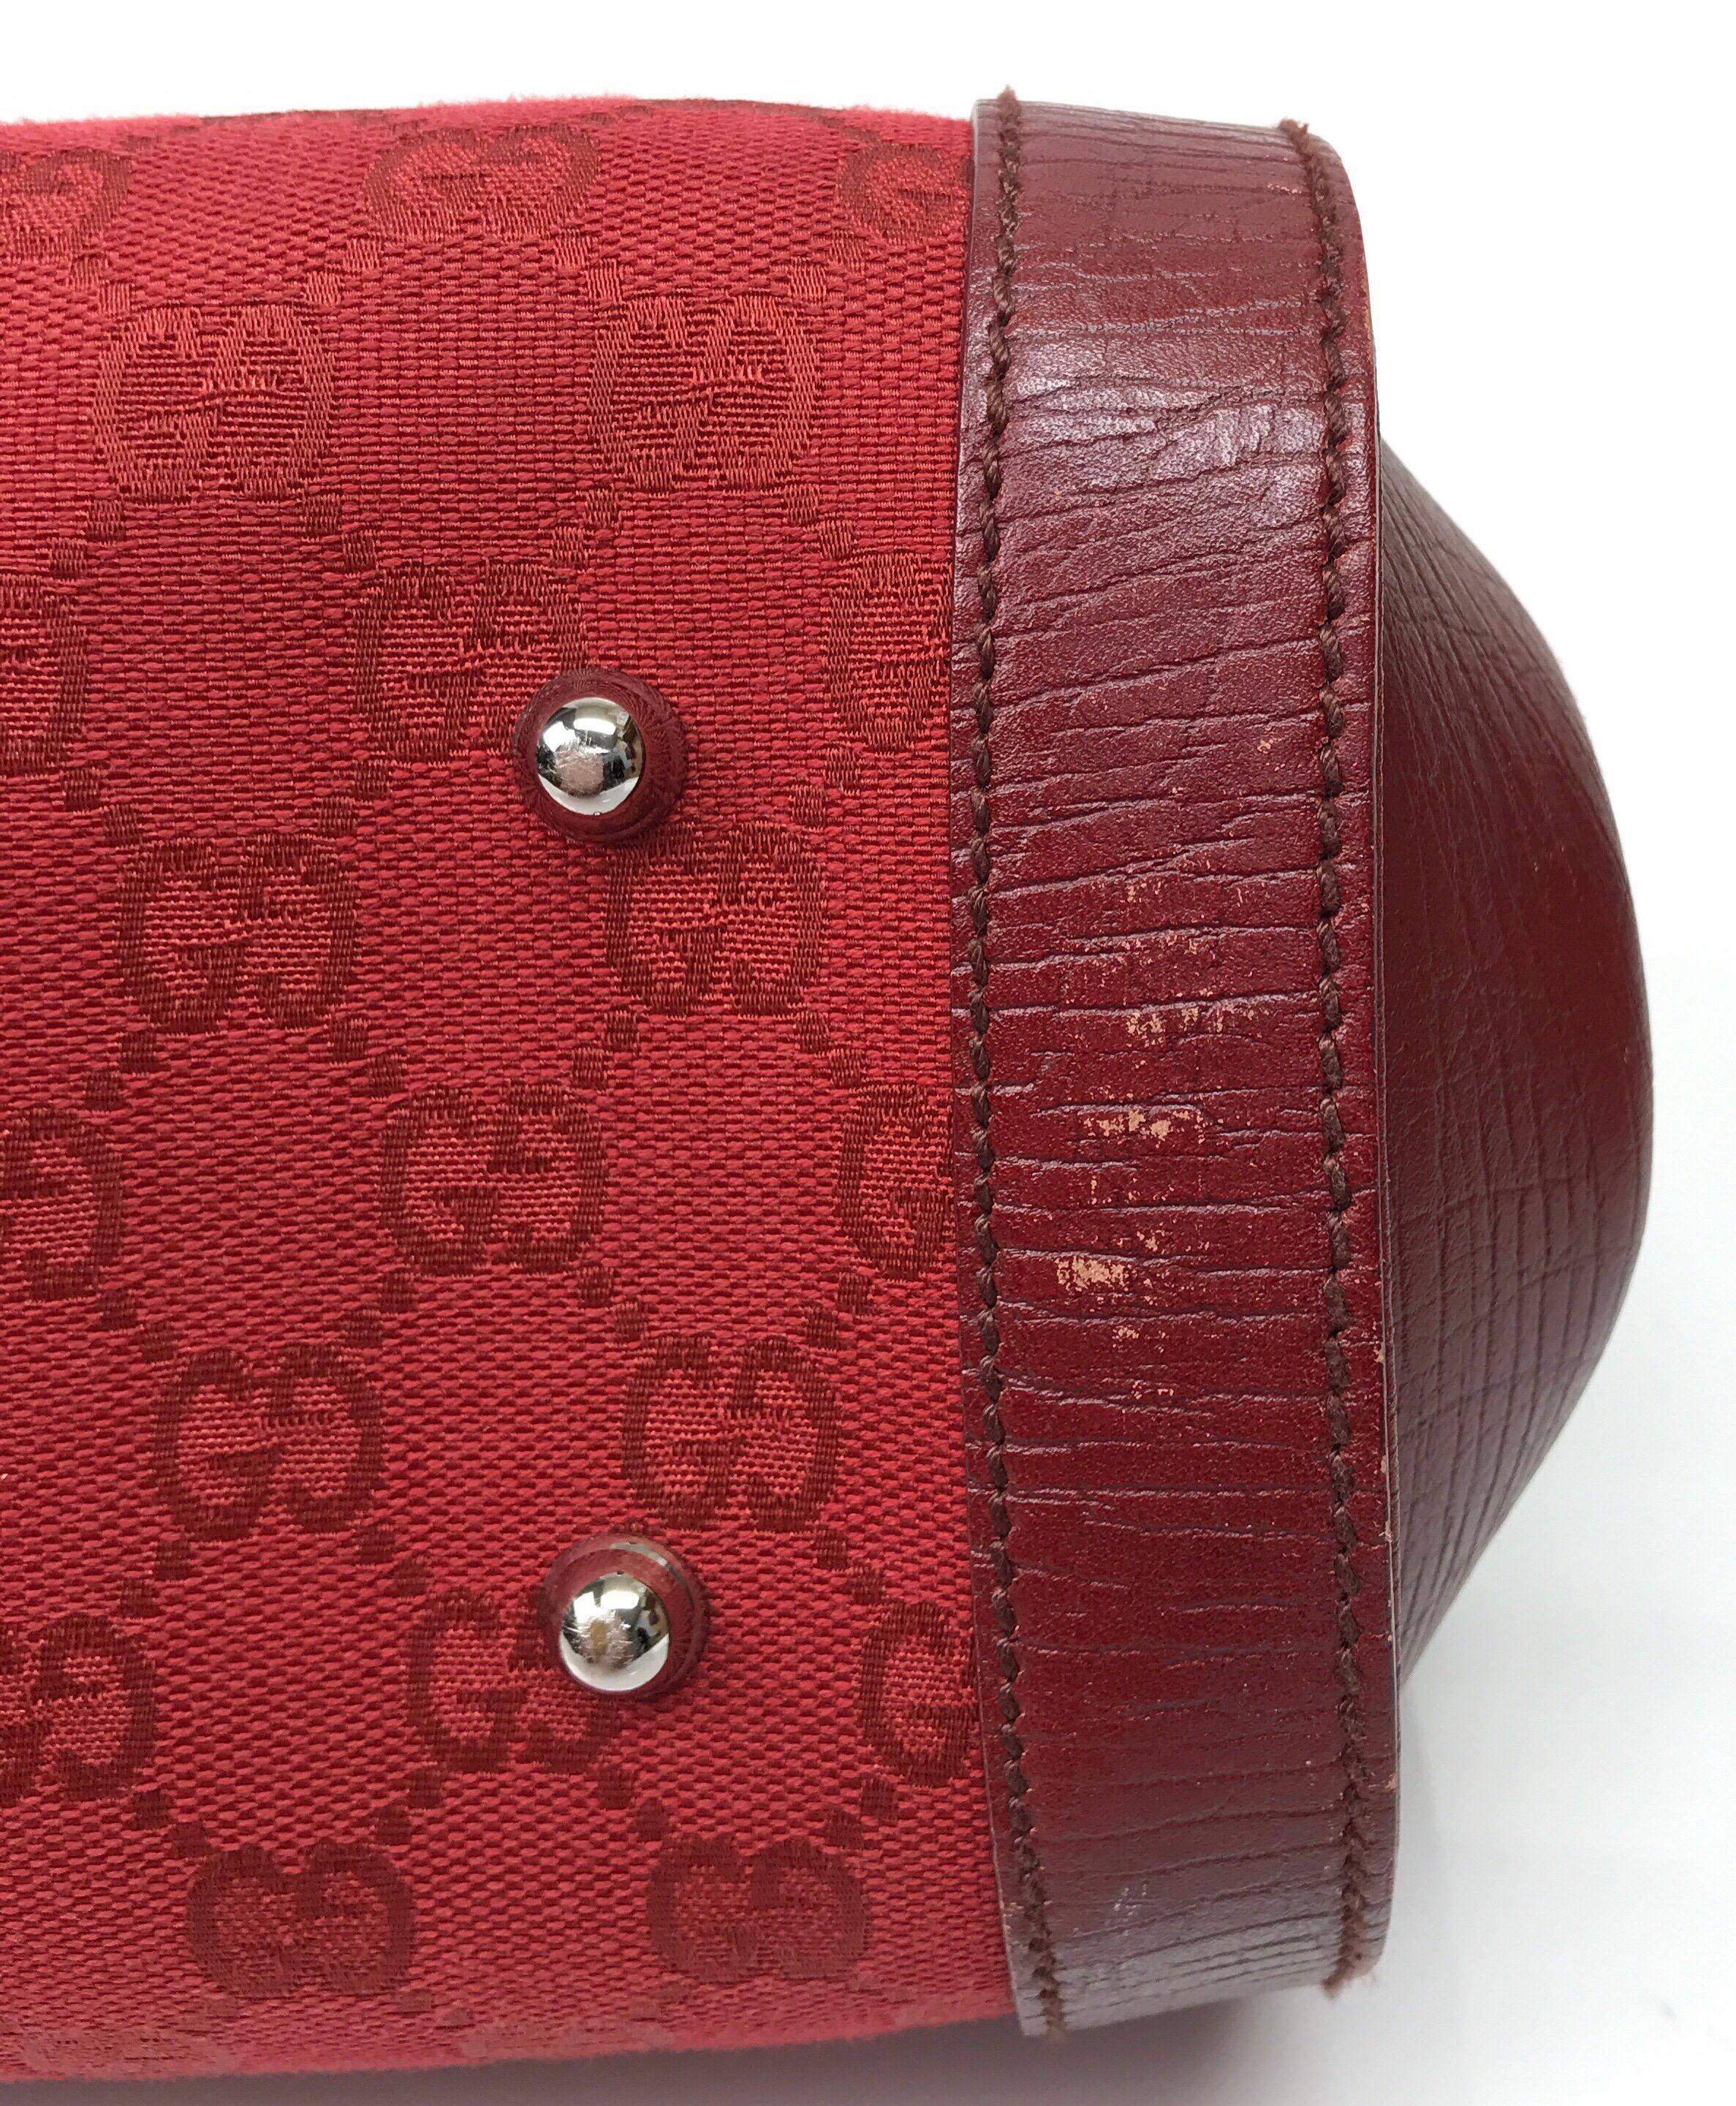 Gucci Red Monogram Leather Bamboo Bullet Handbag In Good Condition For Sale In West Palm Beach, FL